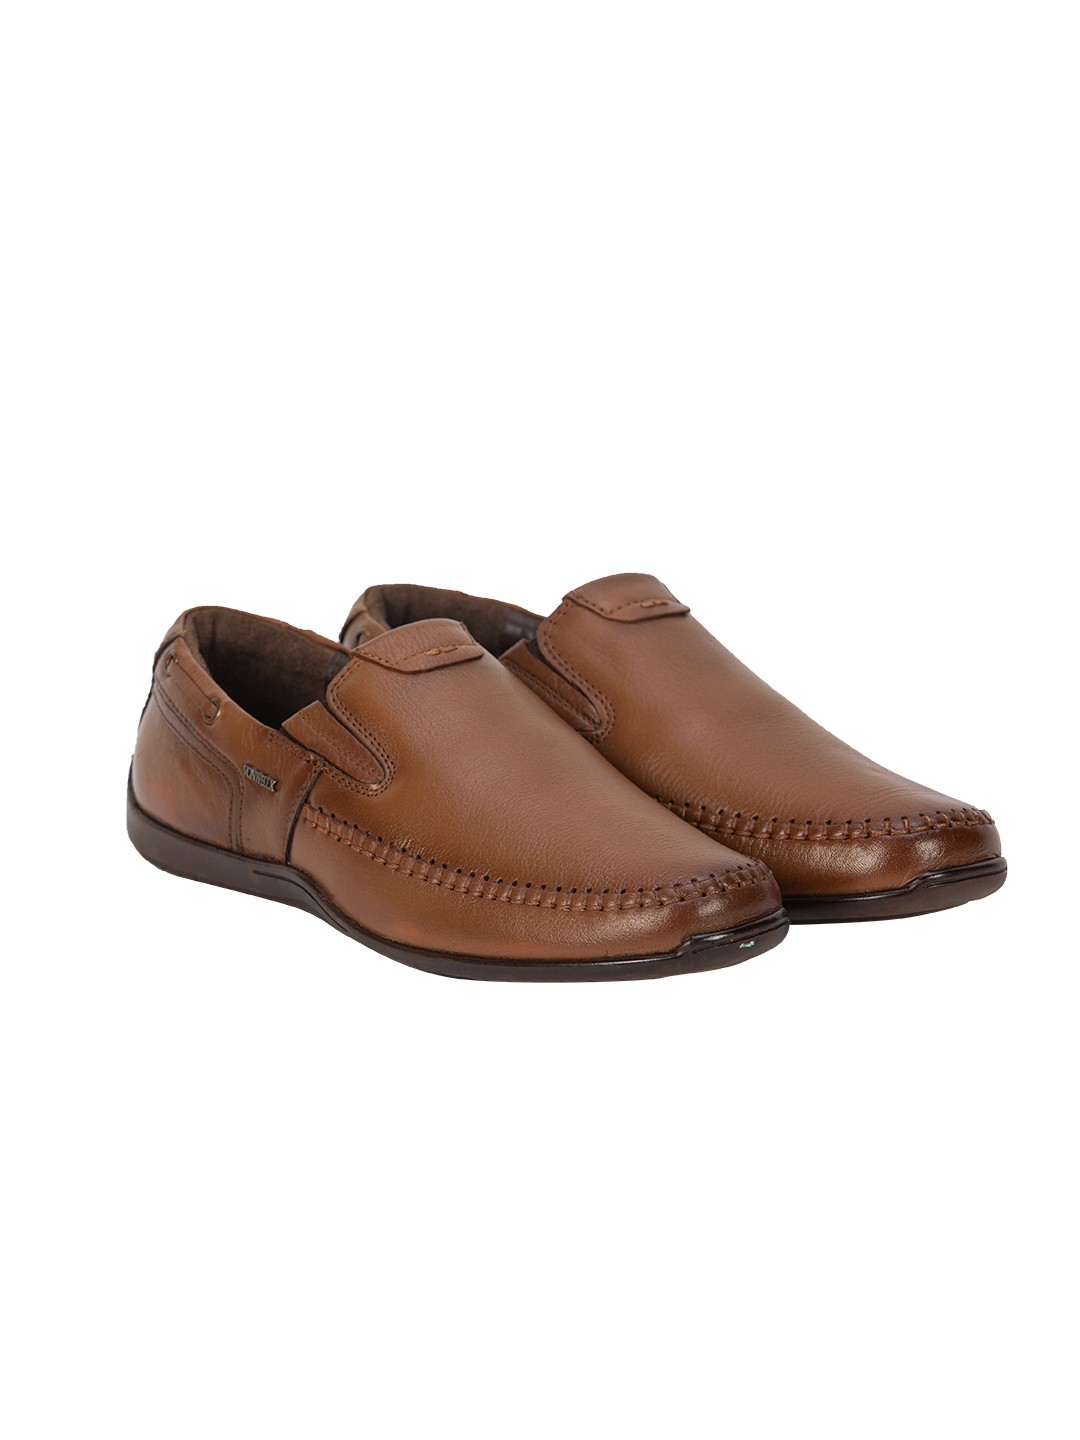 Buy Von Wellx Axel Casual Tan Shoes Online in Amritsar